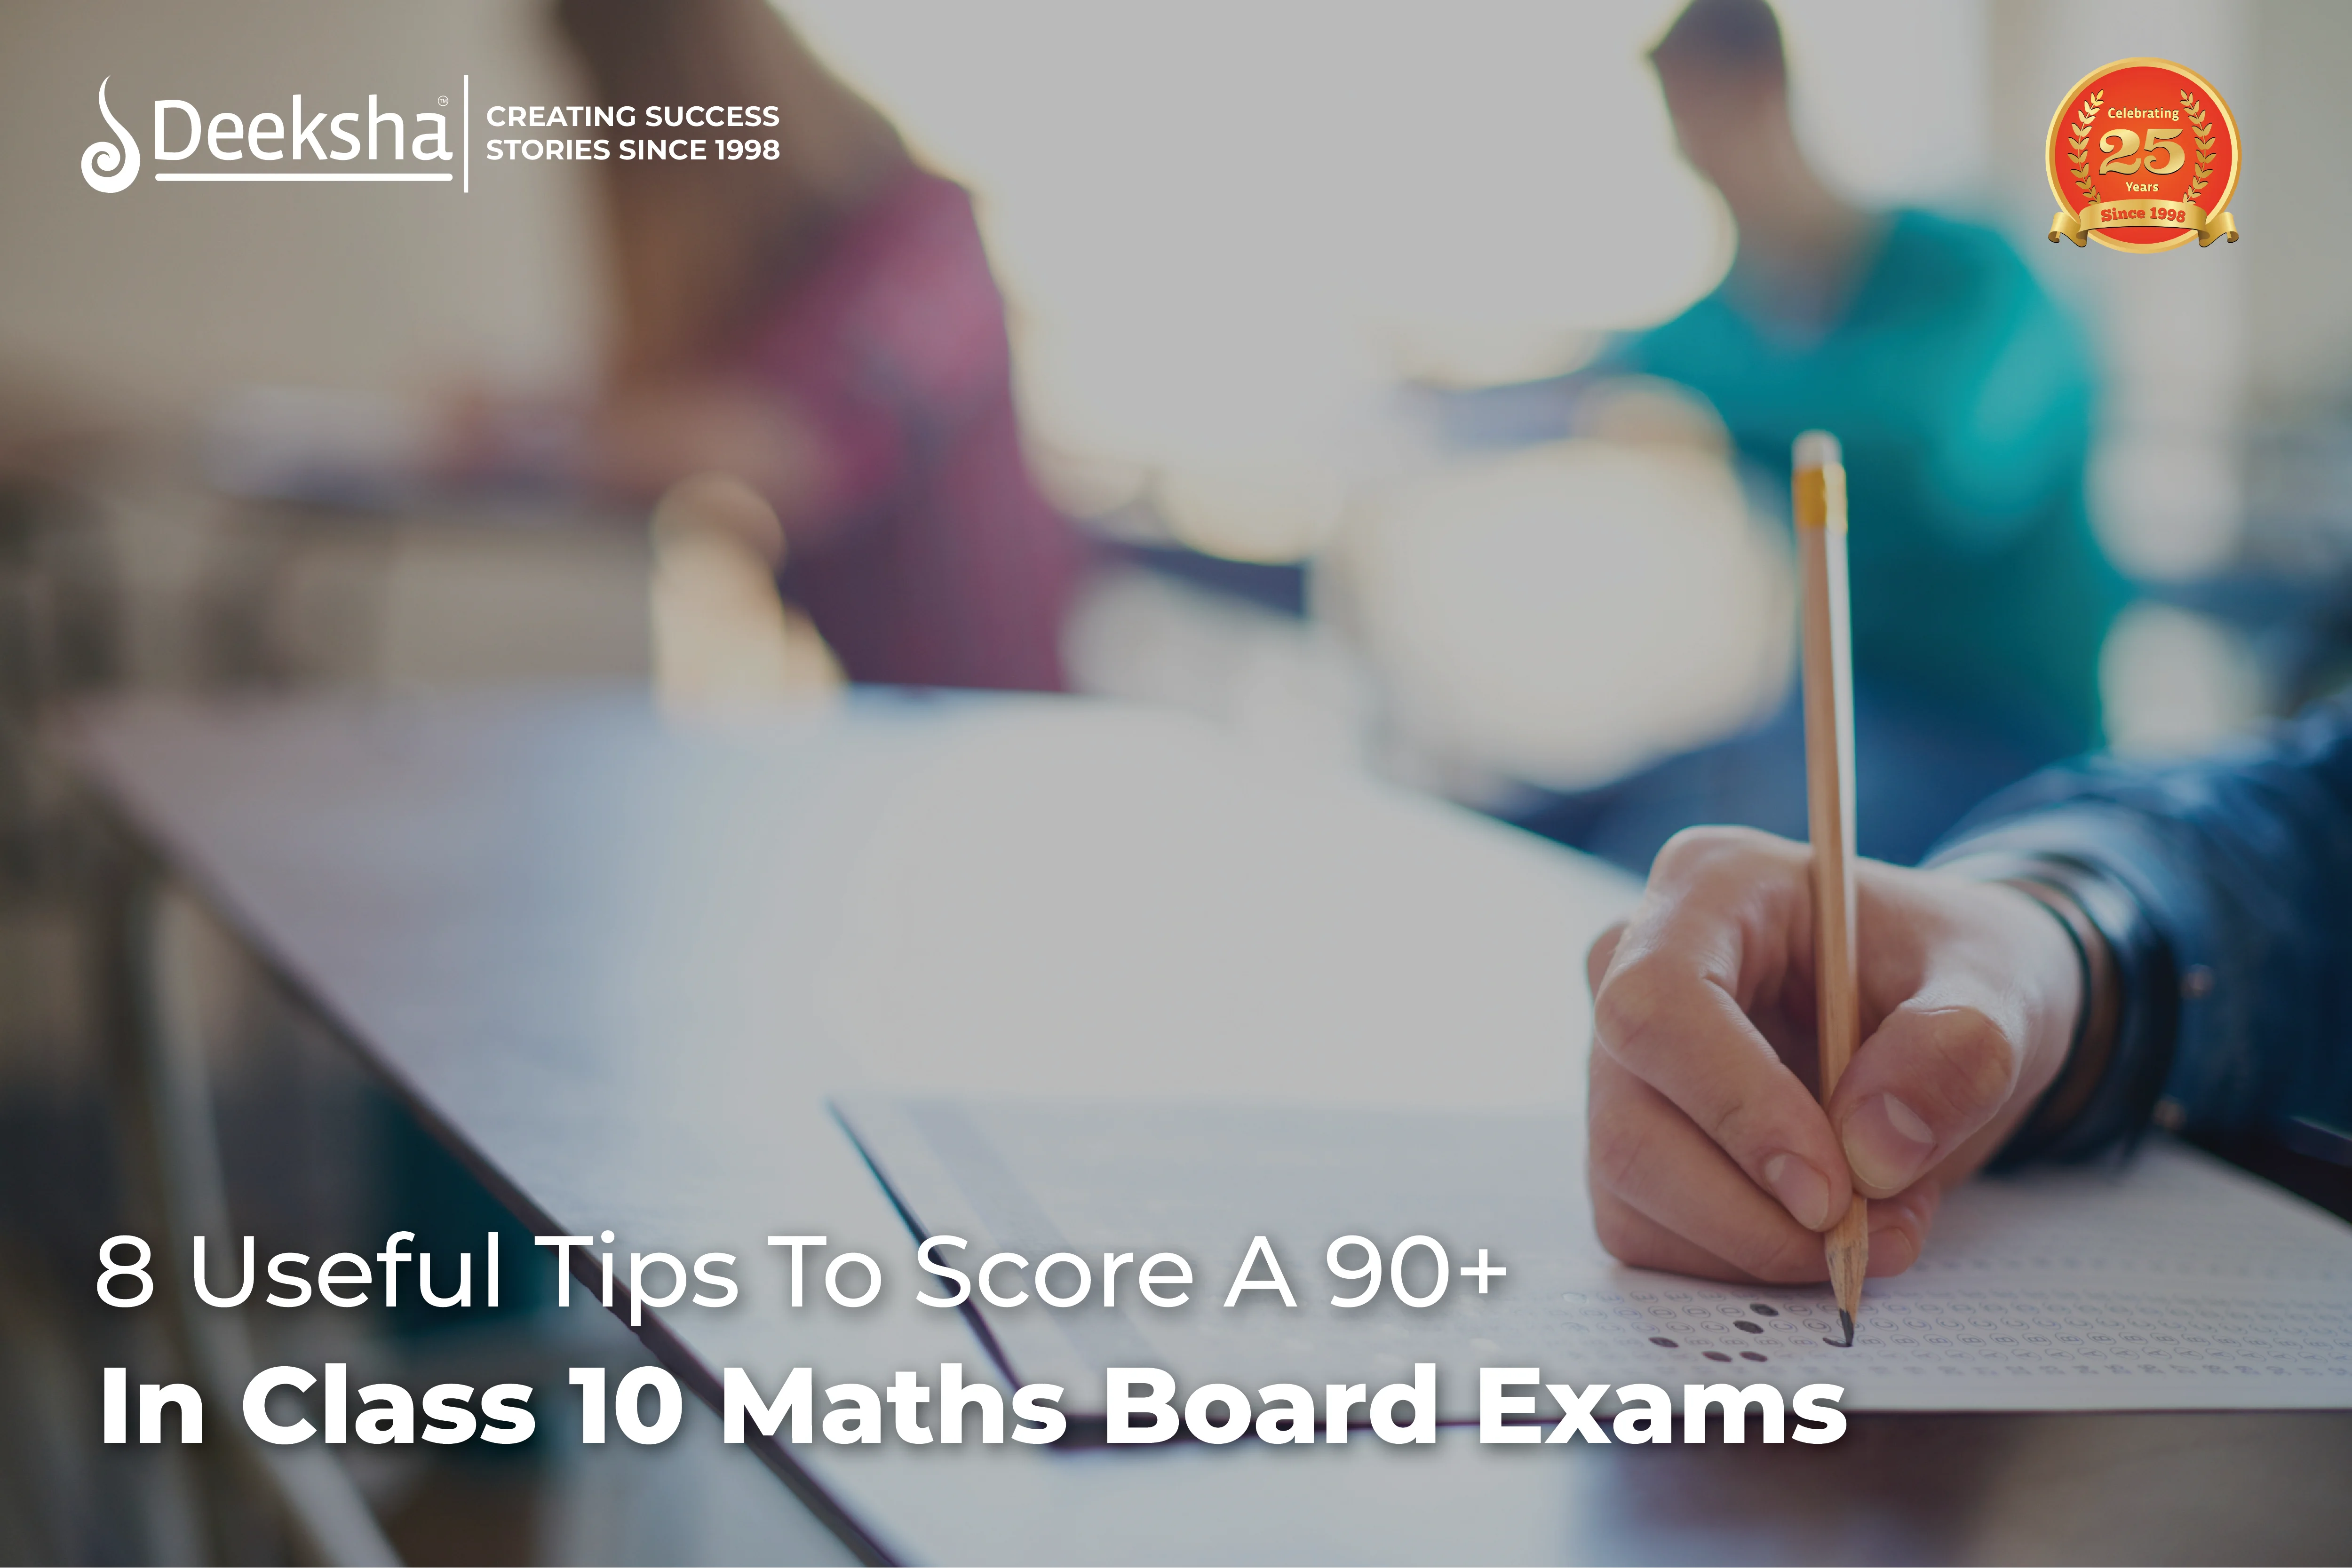 8 Useful Tips To Score A 90+ In Class 10 Maths Board Exams